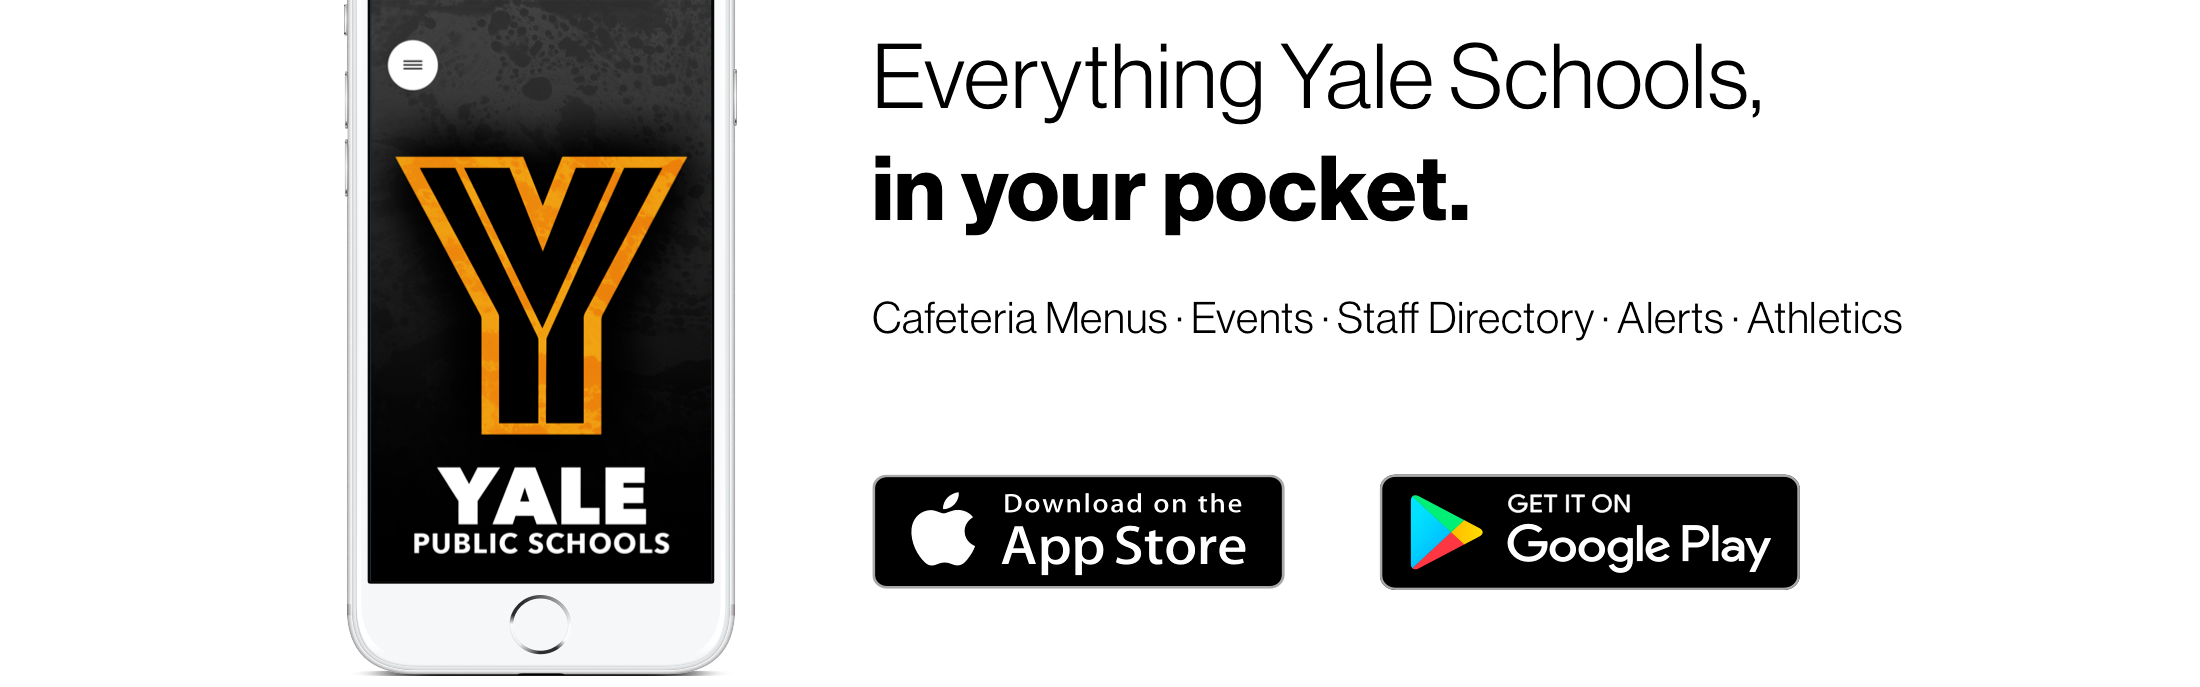 It's everything Yale Schools in your pocket